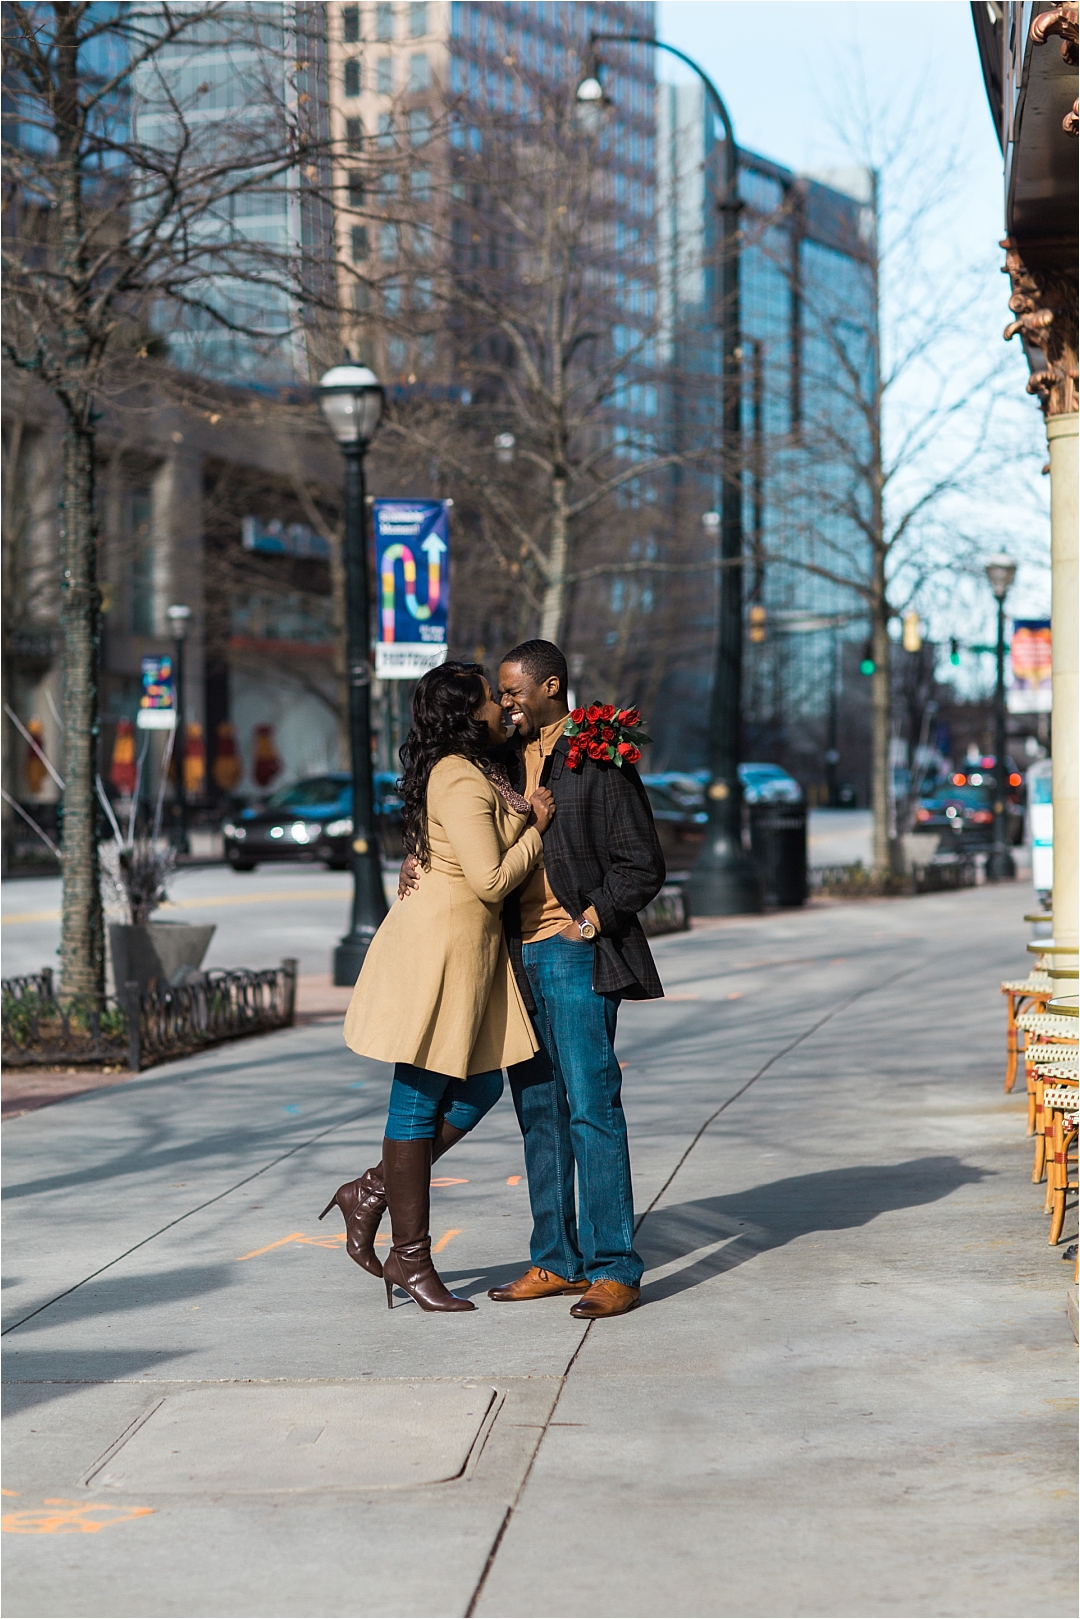 Classic engagement Session in the city_Photos by Atlanta's Top Wedding Photographer Leigh Wolfe